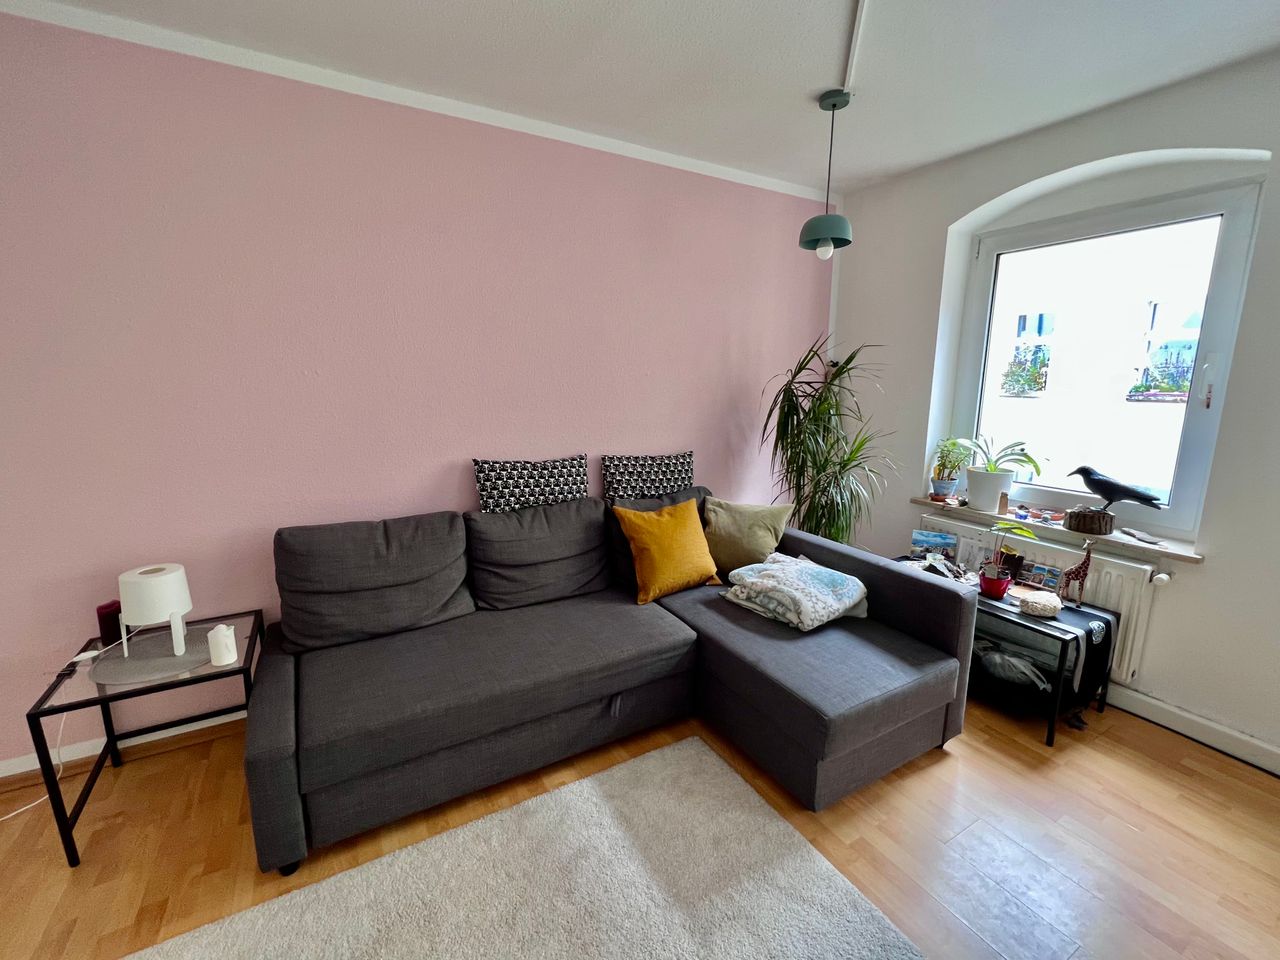 Spacious 2-room flat at central location in Berlin-Mitte